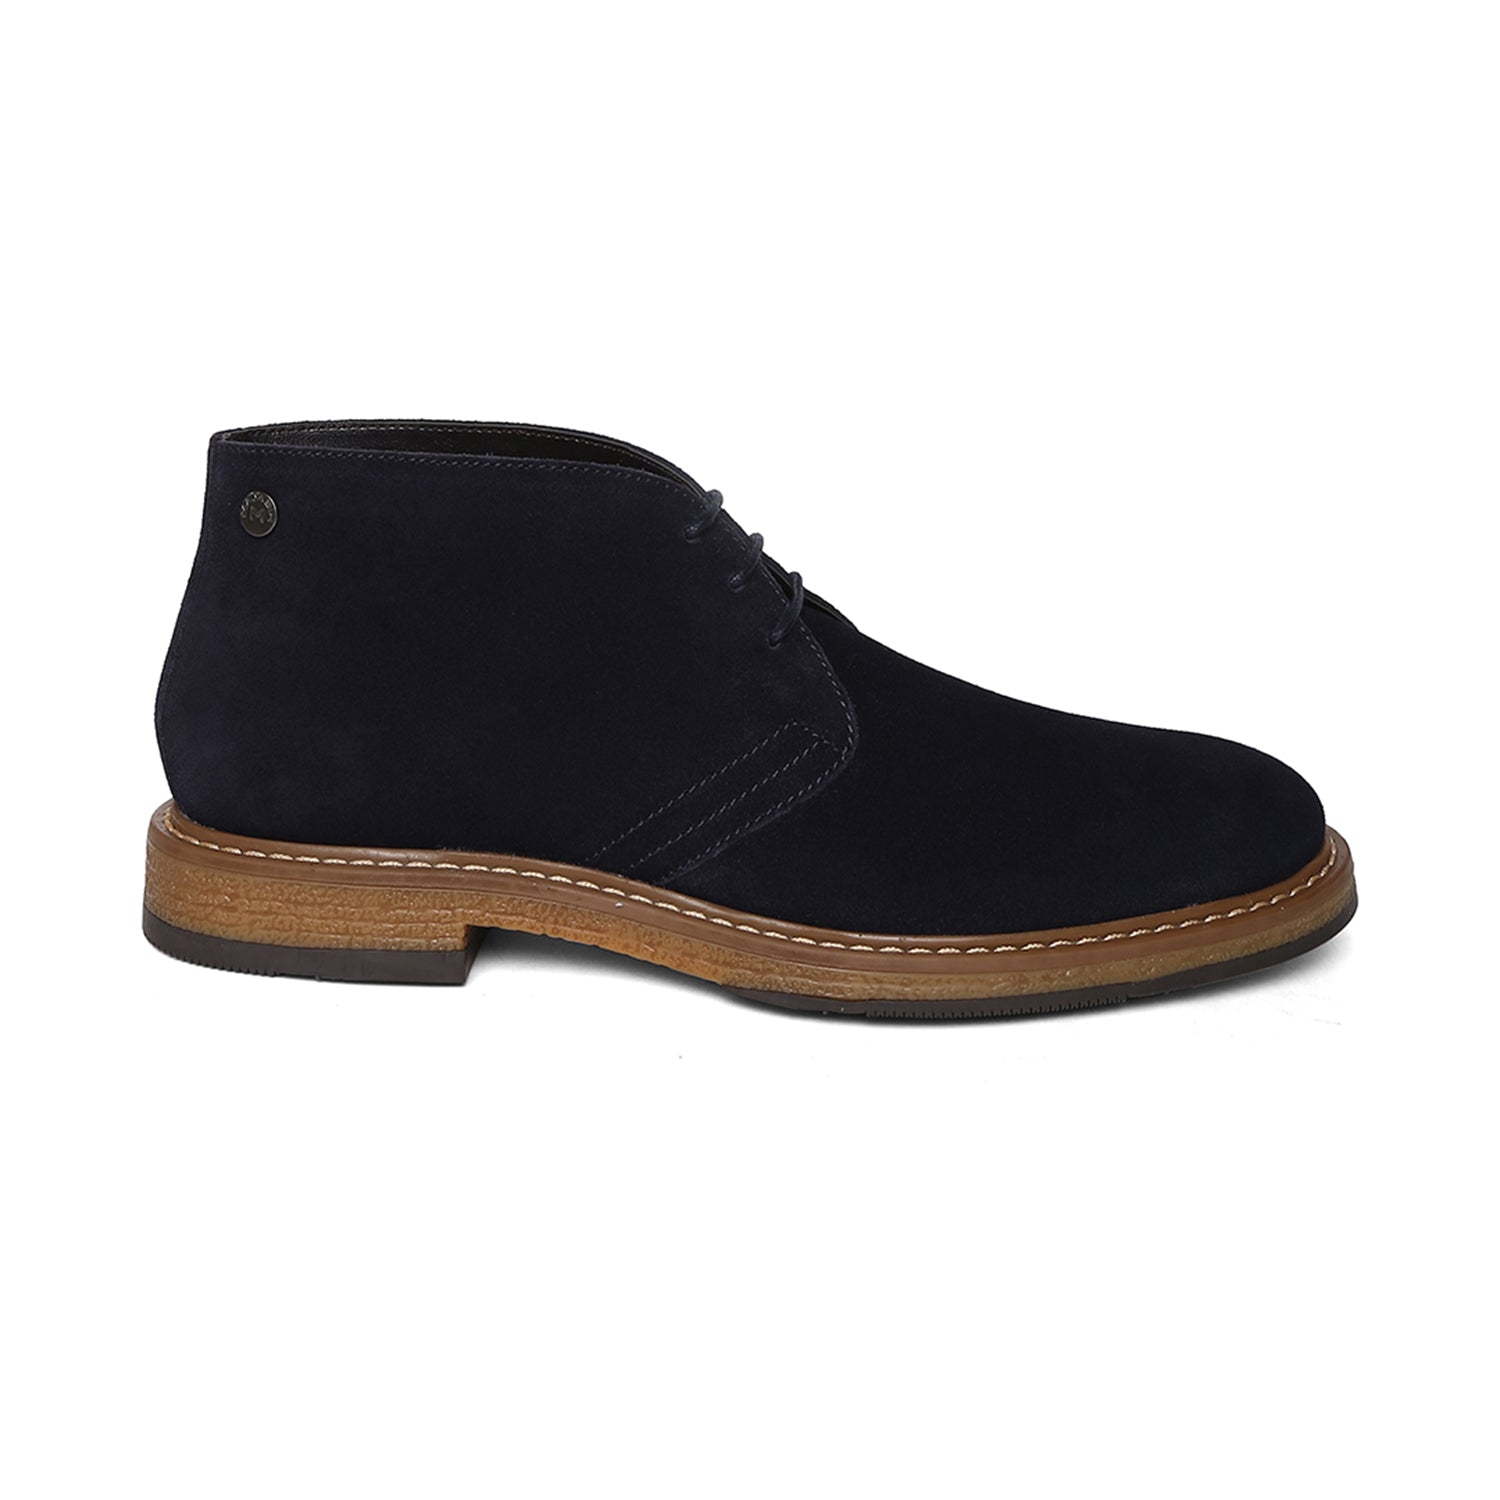 Navy Genuine Suede Leather Chukka Lace Up Boots For Men